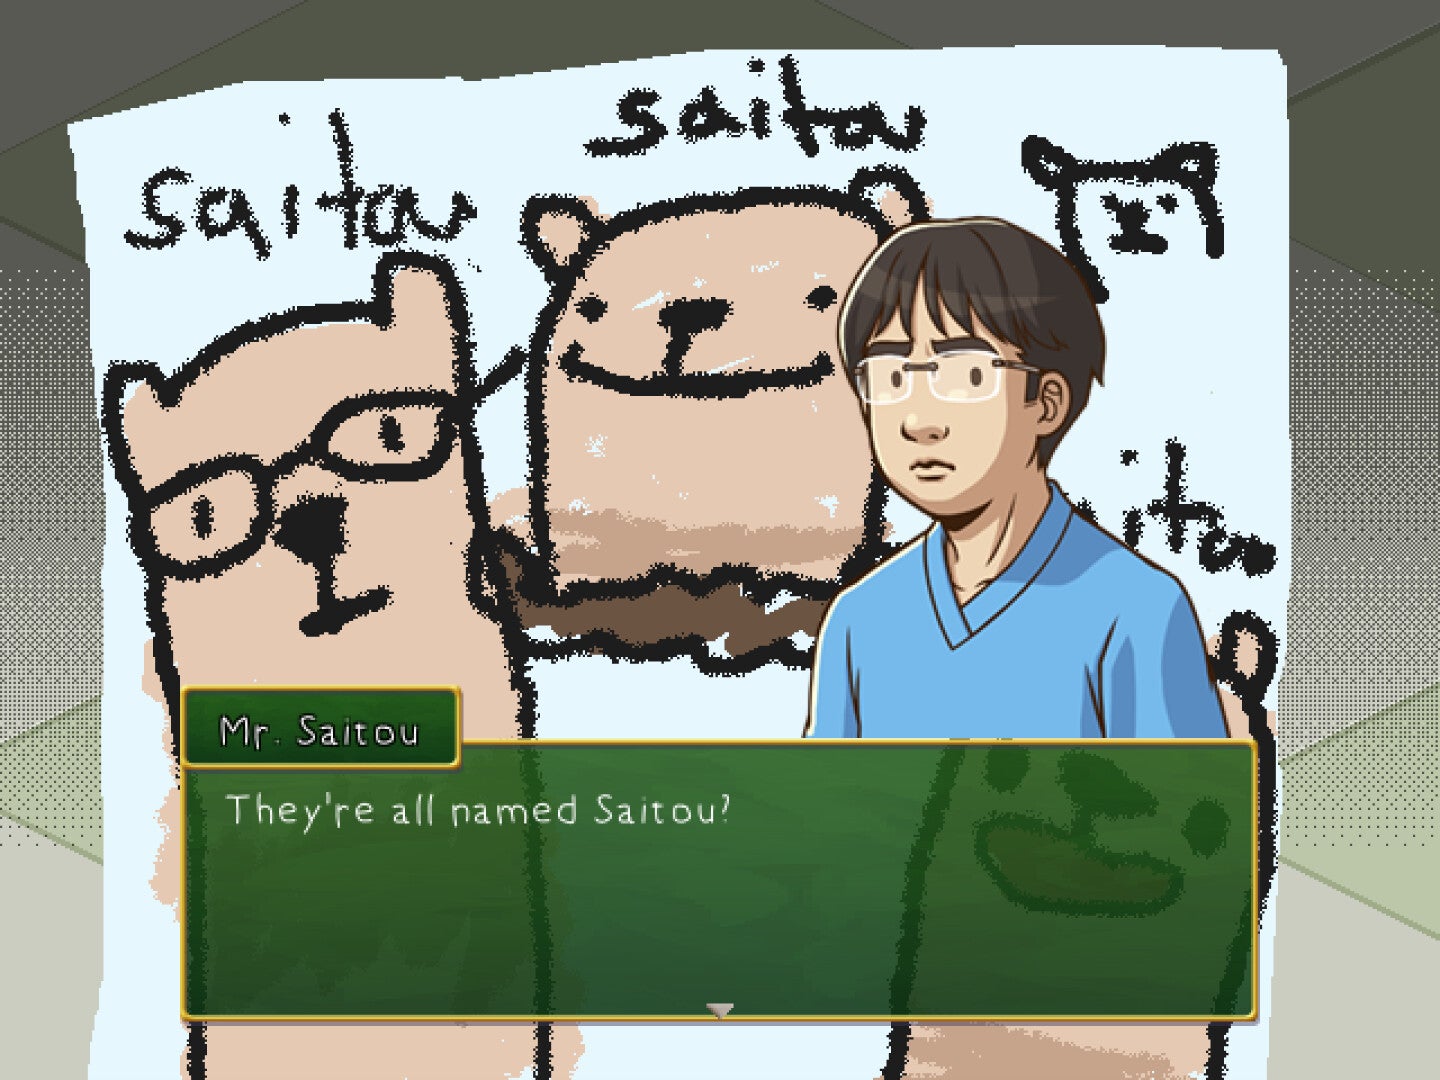 A man named Mr Saitou looks at a drawing of llama worms all called Saitou in the game Mr Saitou